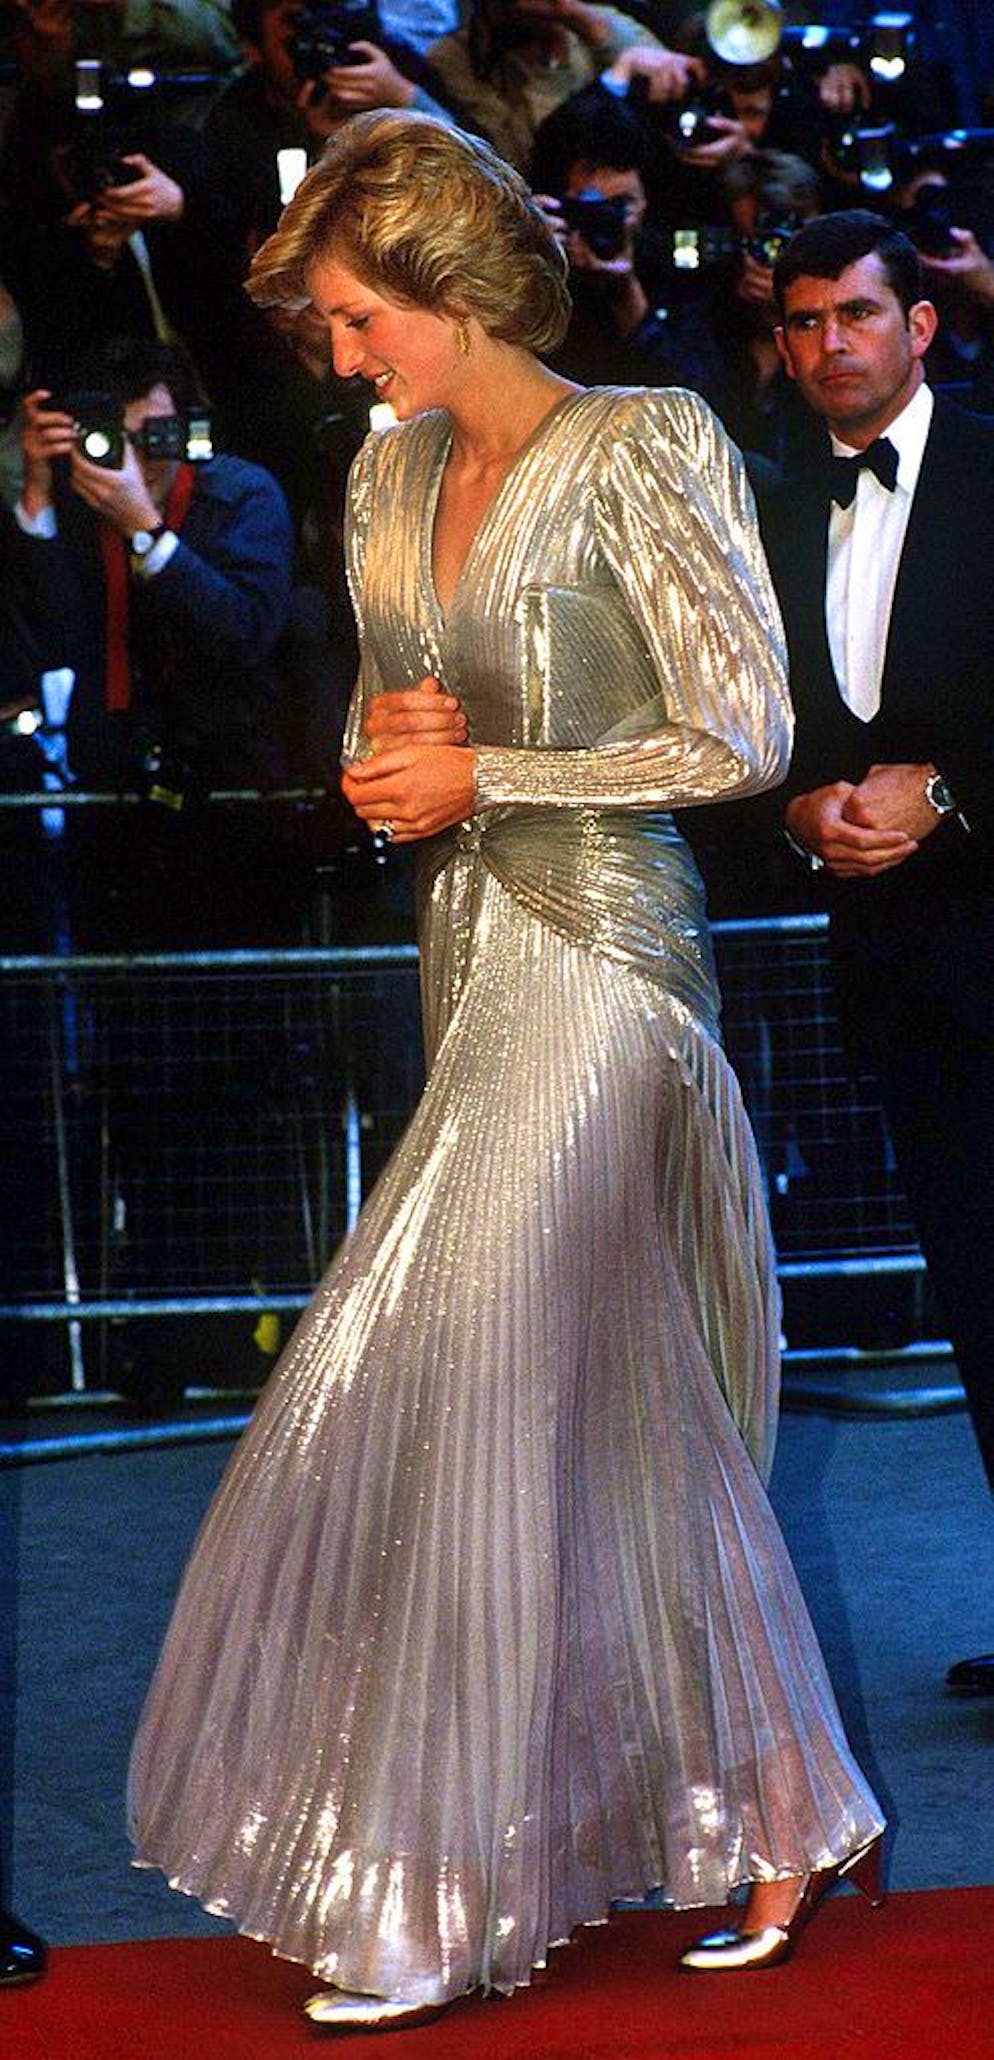 Princess Diana (1961 - 1997) arrives for the London premiere of the James Bond film 'A View To A Kill' at the Empire, Leicester Square, July 1985. She is wearing a gold lame evening gown by Bruce Oldfield. (Photo by Jayne Fincher/Princess Diana Archive/Getty Images)